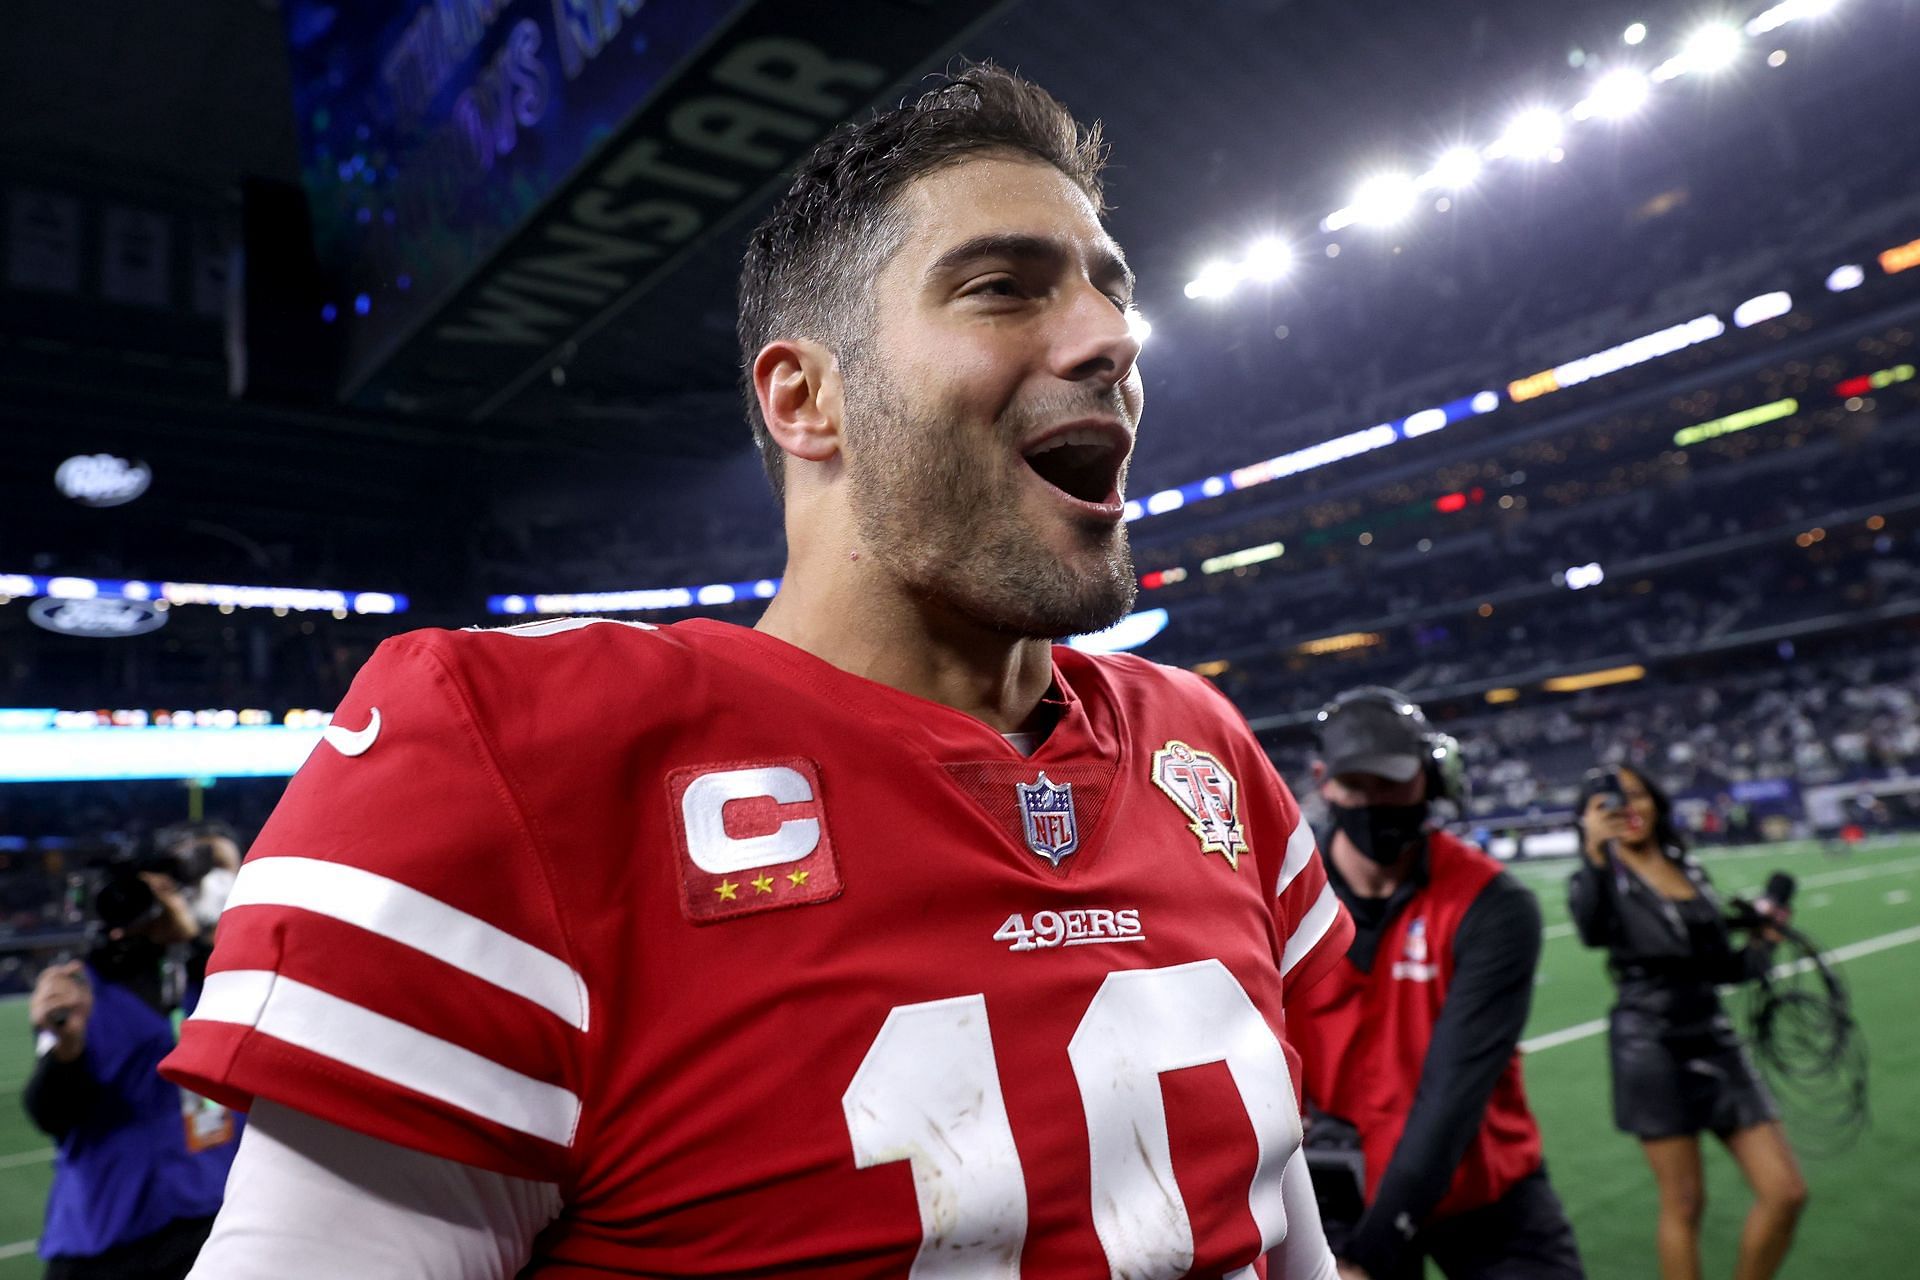 Where will Jimmy G end up next season?